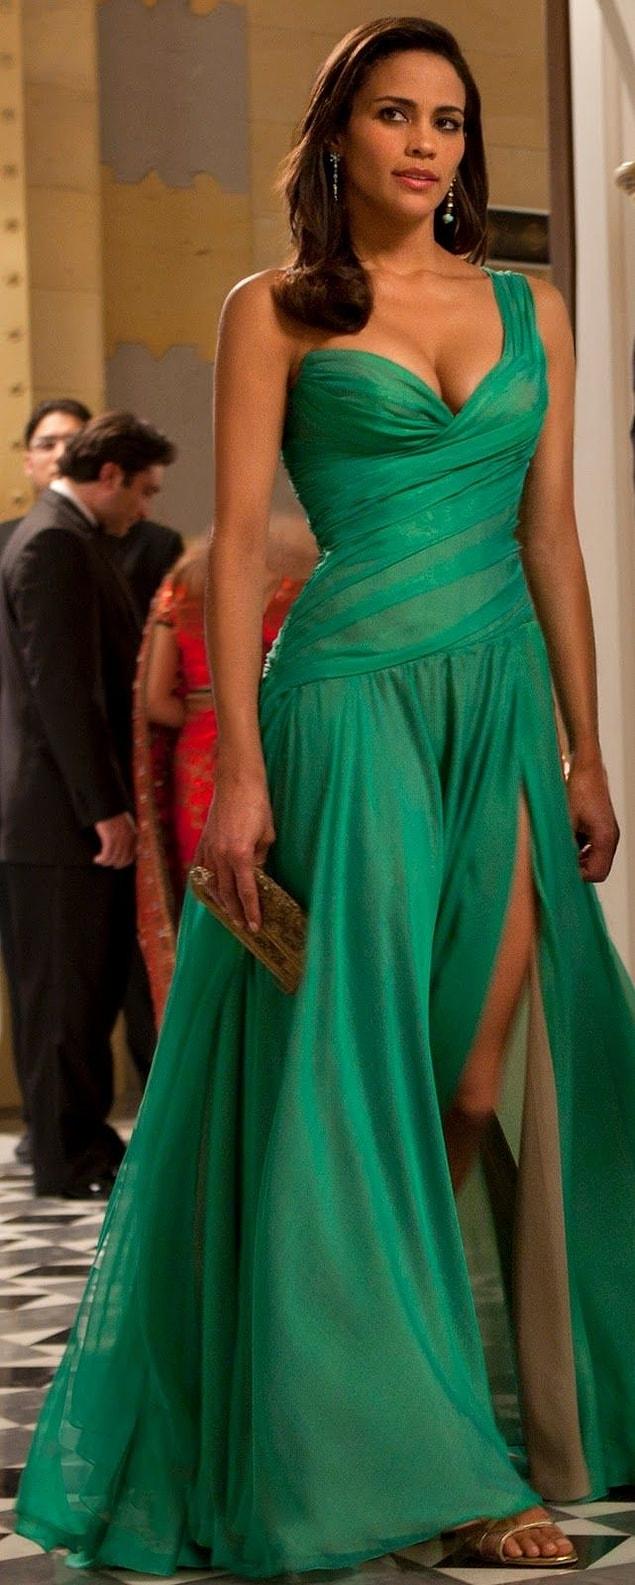 20. Paula Patton rocked with this green dress in Mission: Impossible 4 (2011)